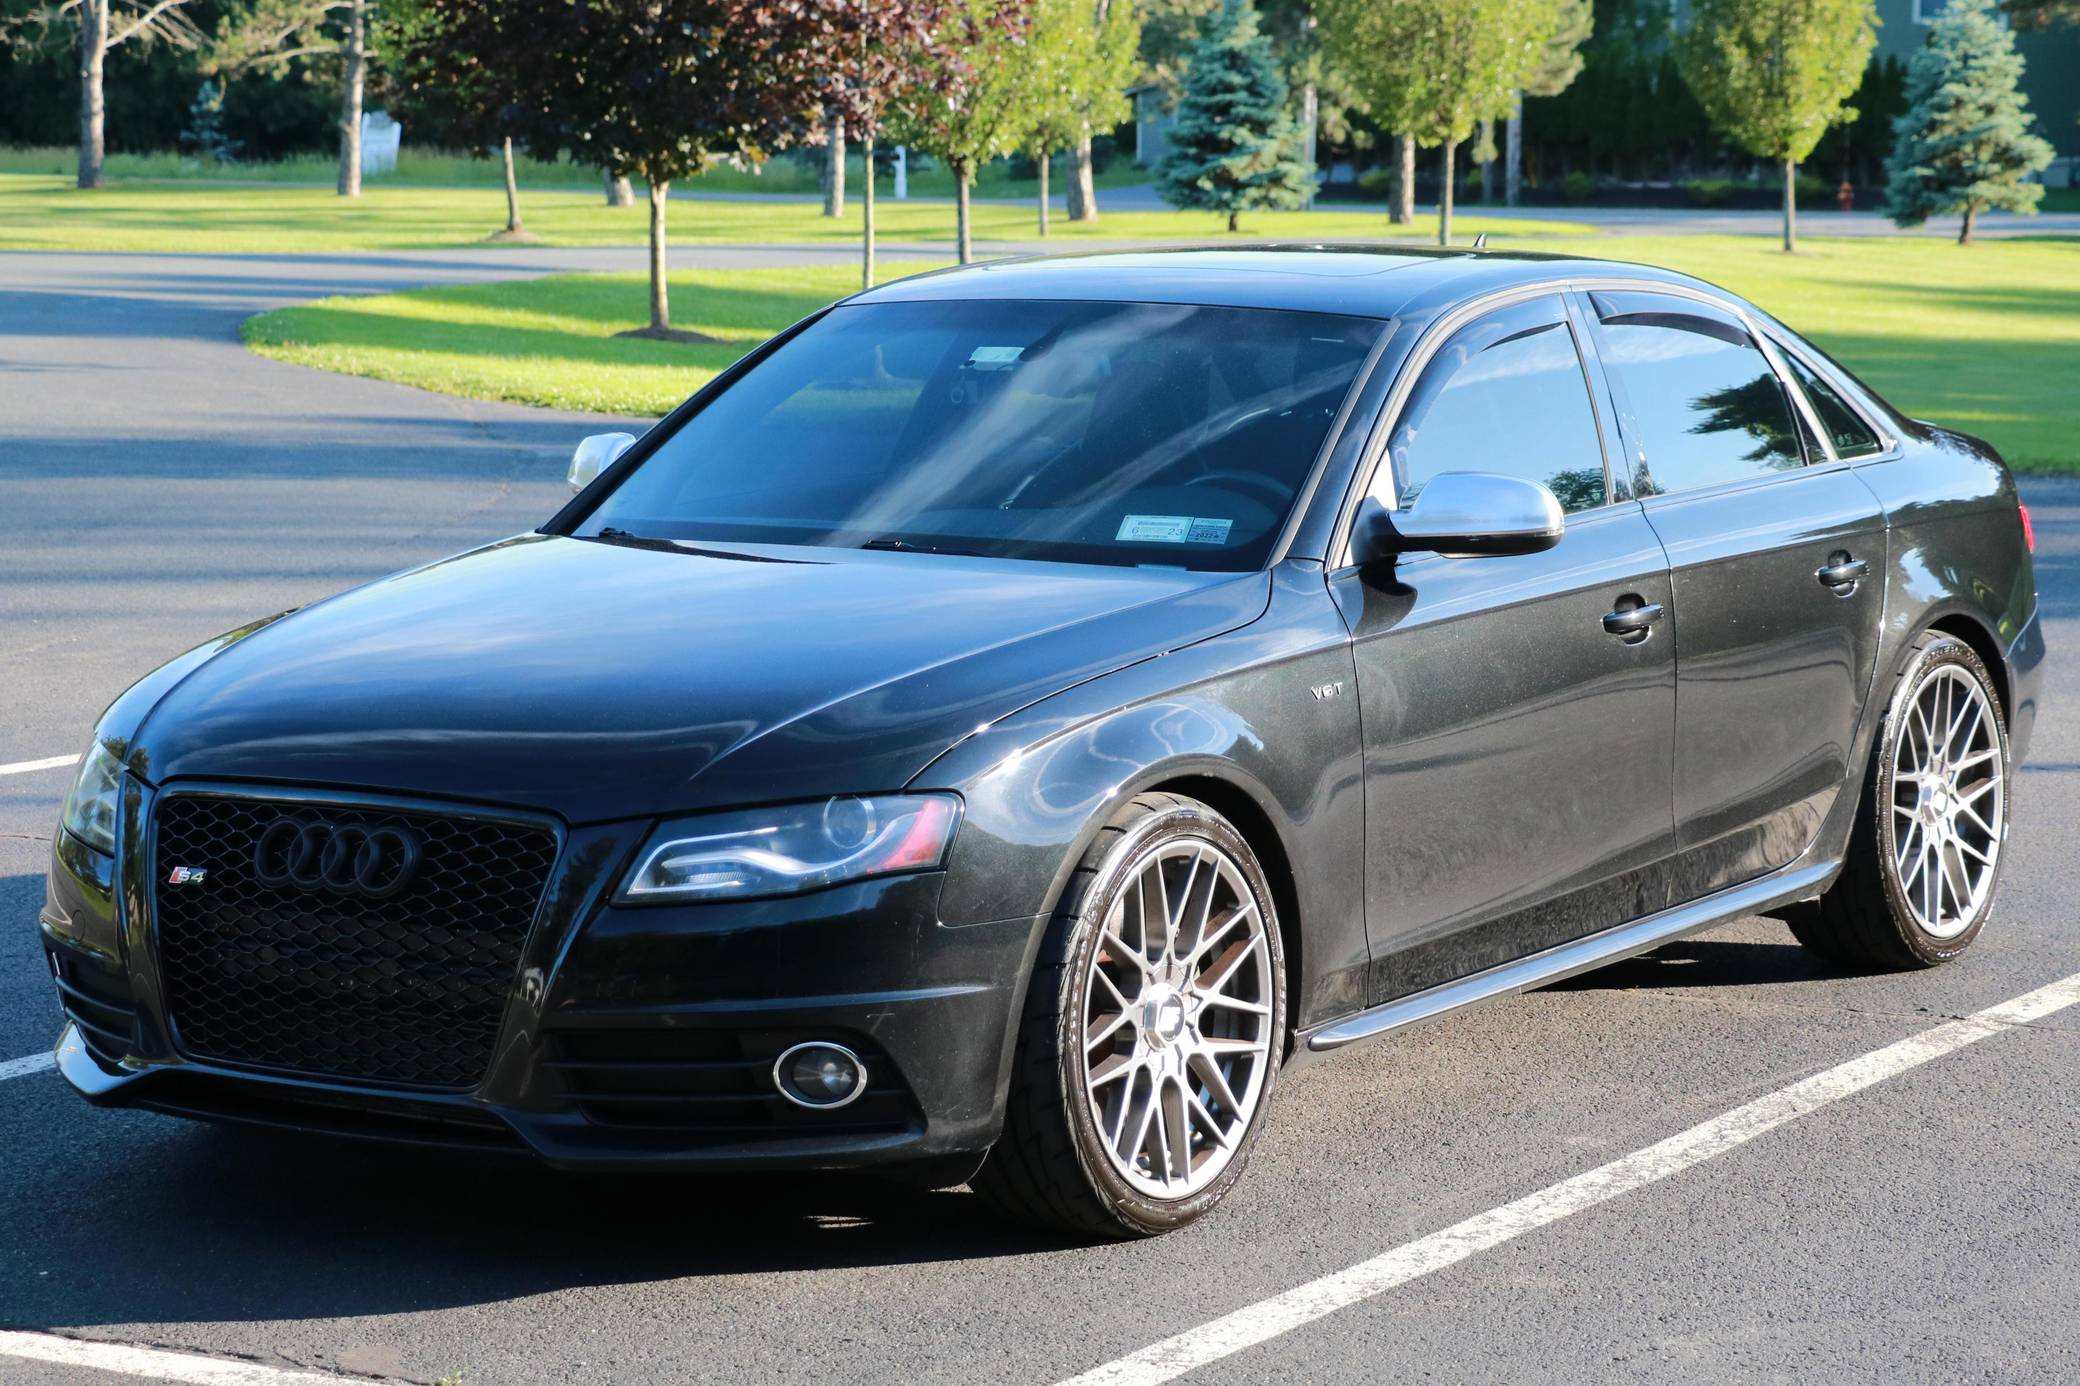 Clean OEM+ Audi A4 B8 With Subtle Mods and Air Suspension 